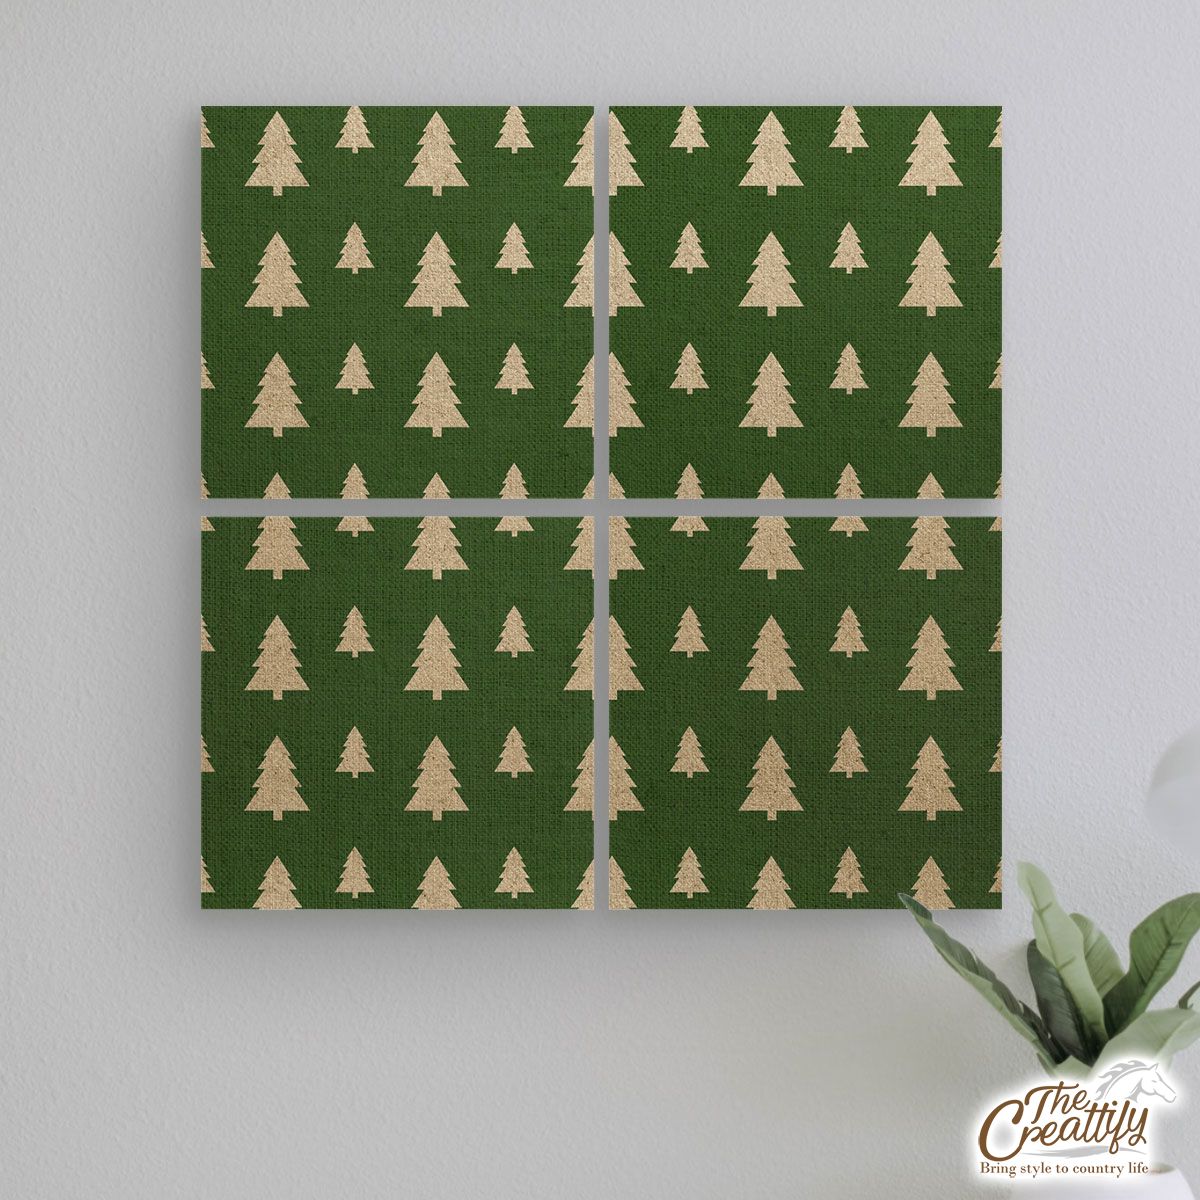 Christmas Tree, Christmas Tree Decorations, Pine Tree Pattern On Green 2 Mural With Frame